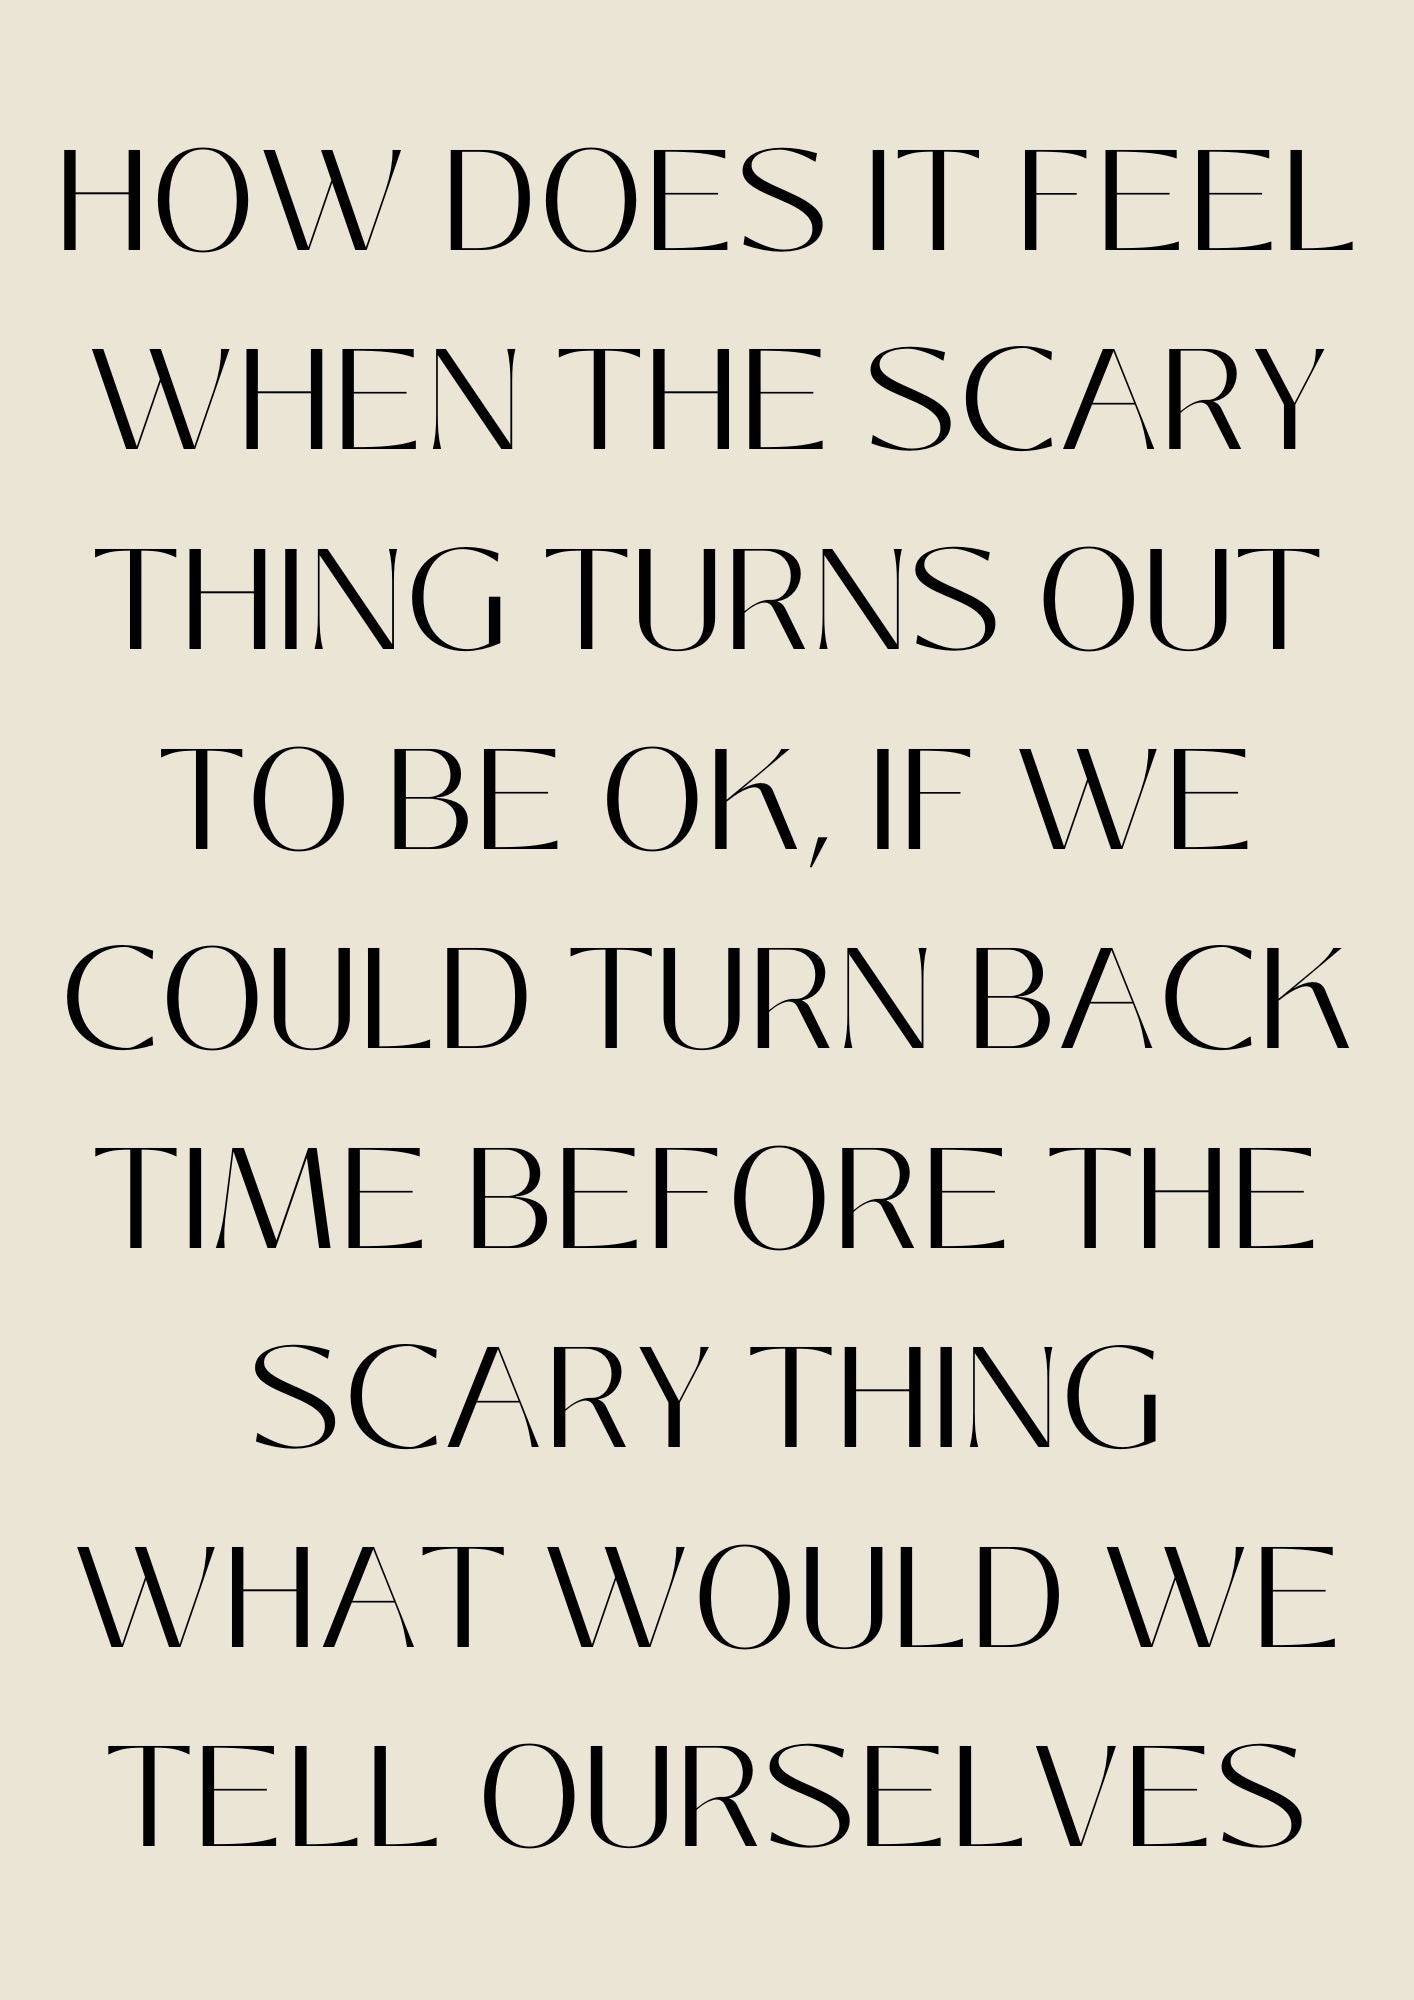 HOW DOES IT FEEL WHEN THE SCARY THING TURNS OUT TO BE OK, IF WE COULD TURN BACK TIME BEFORE THE SCARY THING WHAT WOULD WE TELL OURSELVES Poster (Digital Download)